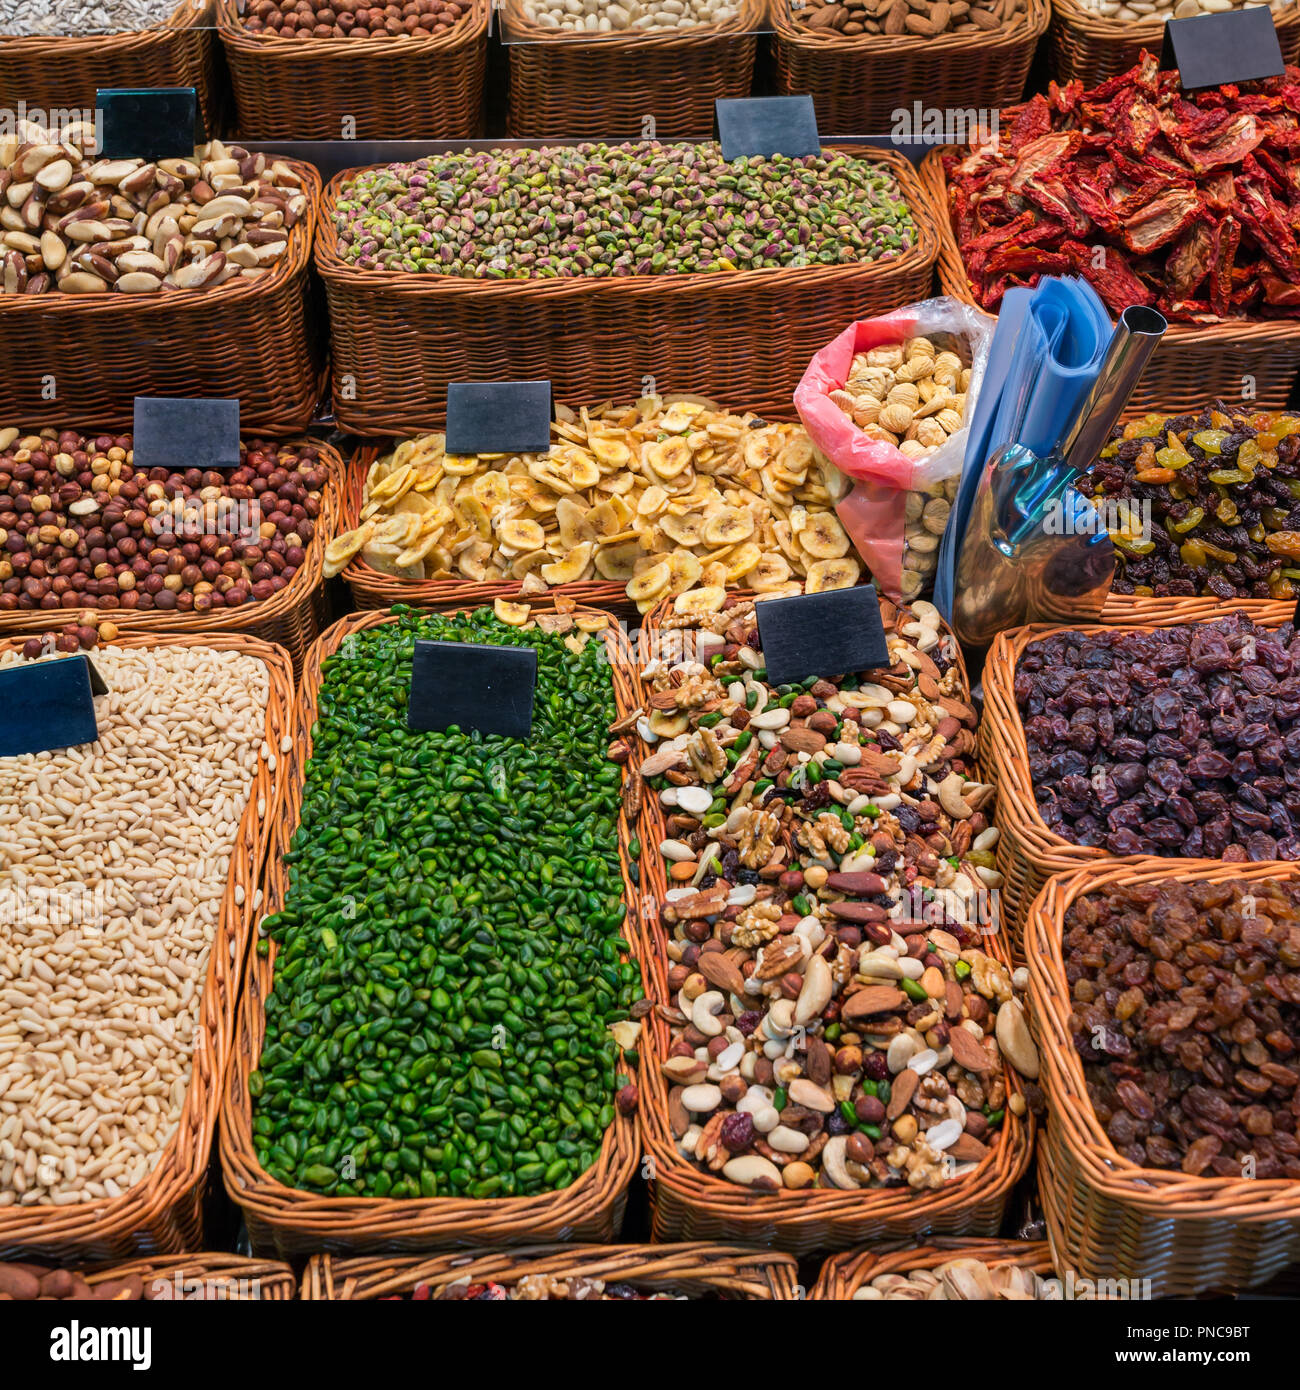 Dried fruits and nuts at market in Barcelona, Spain Stock Photo